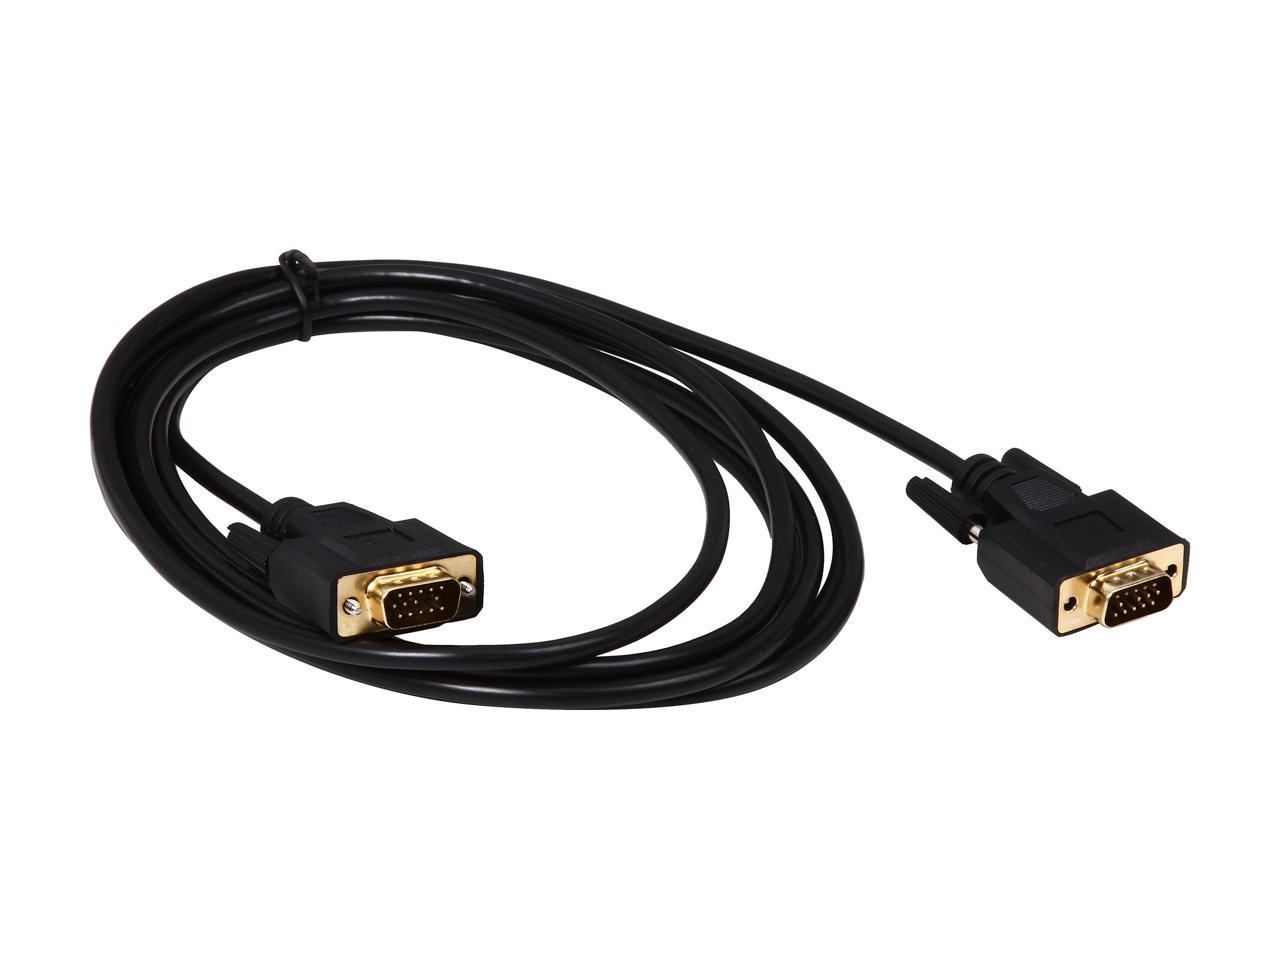 Tripp Lite P512-010 10 ft. VGA Monitor Cable HD-15M to HD-15M Gold Connectors - image 2 of 3